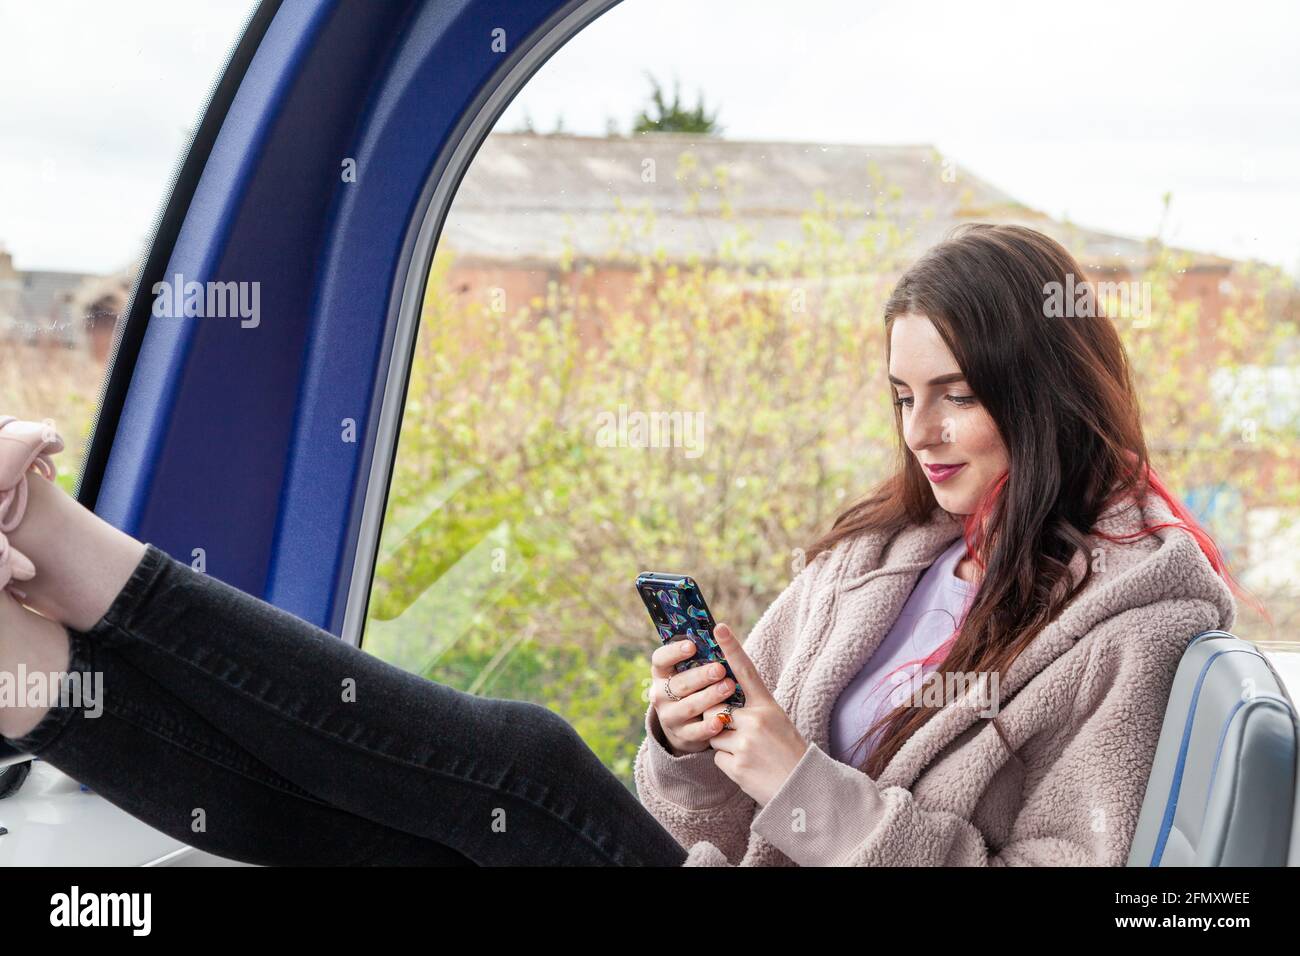 a young woman sitting at the front of double decker bus with her feet up and text messaging Stock Photo